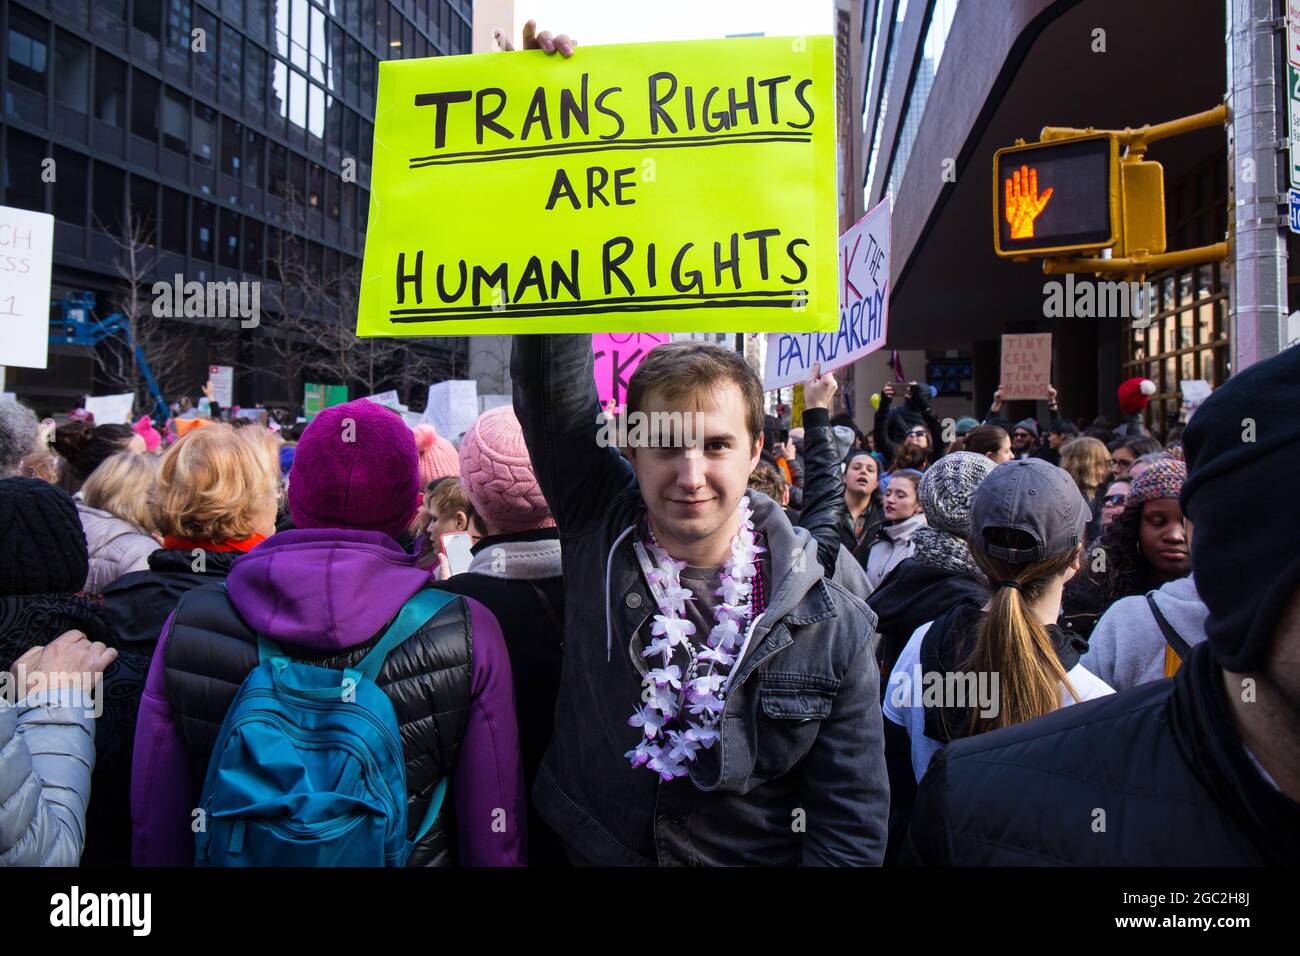 NEW YORK - JANUARY 21, 2017: An unidentified person holds a sign that reads 'Trans Rights Are Human Rights' at the Women's March in New York City. Stock Photo